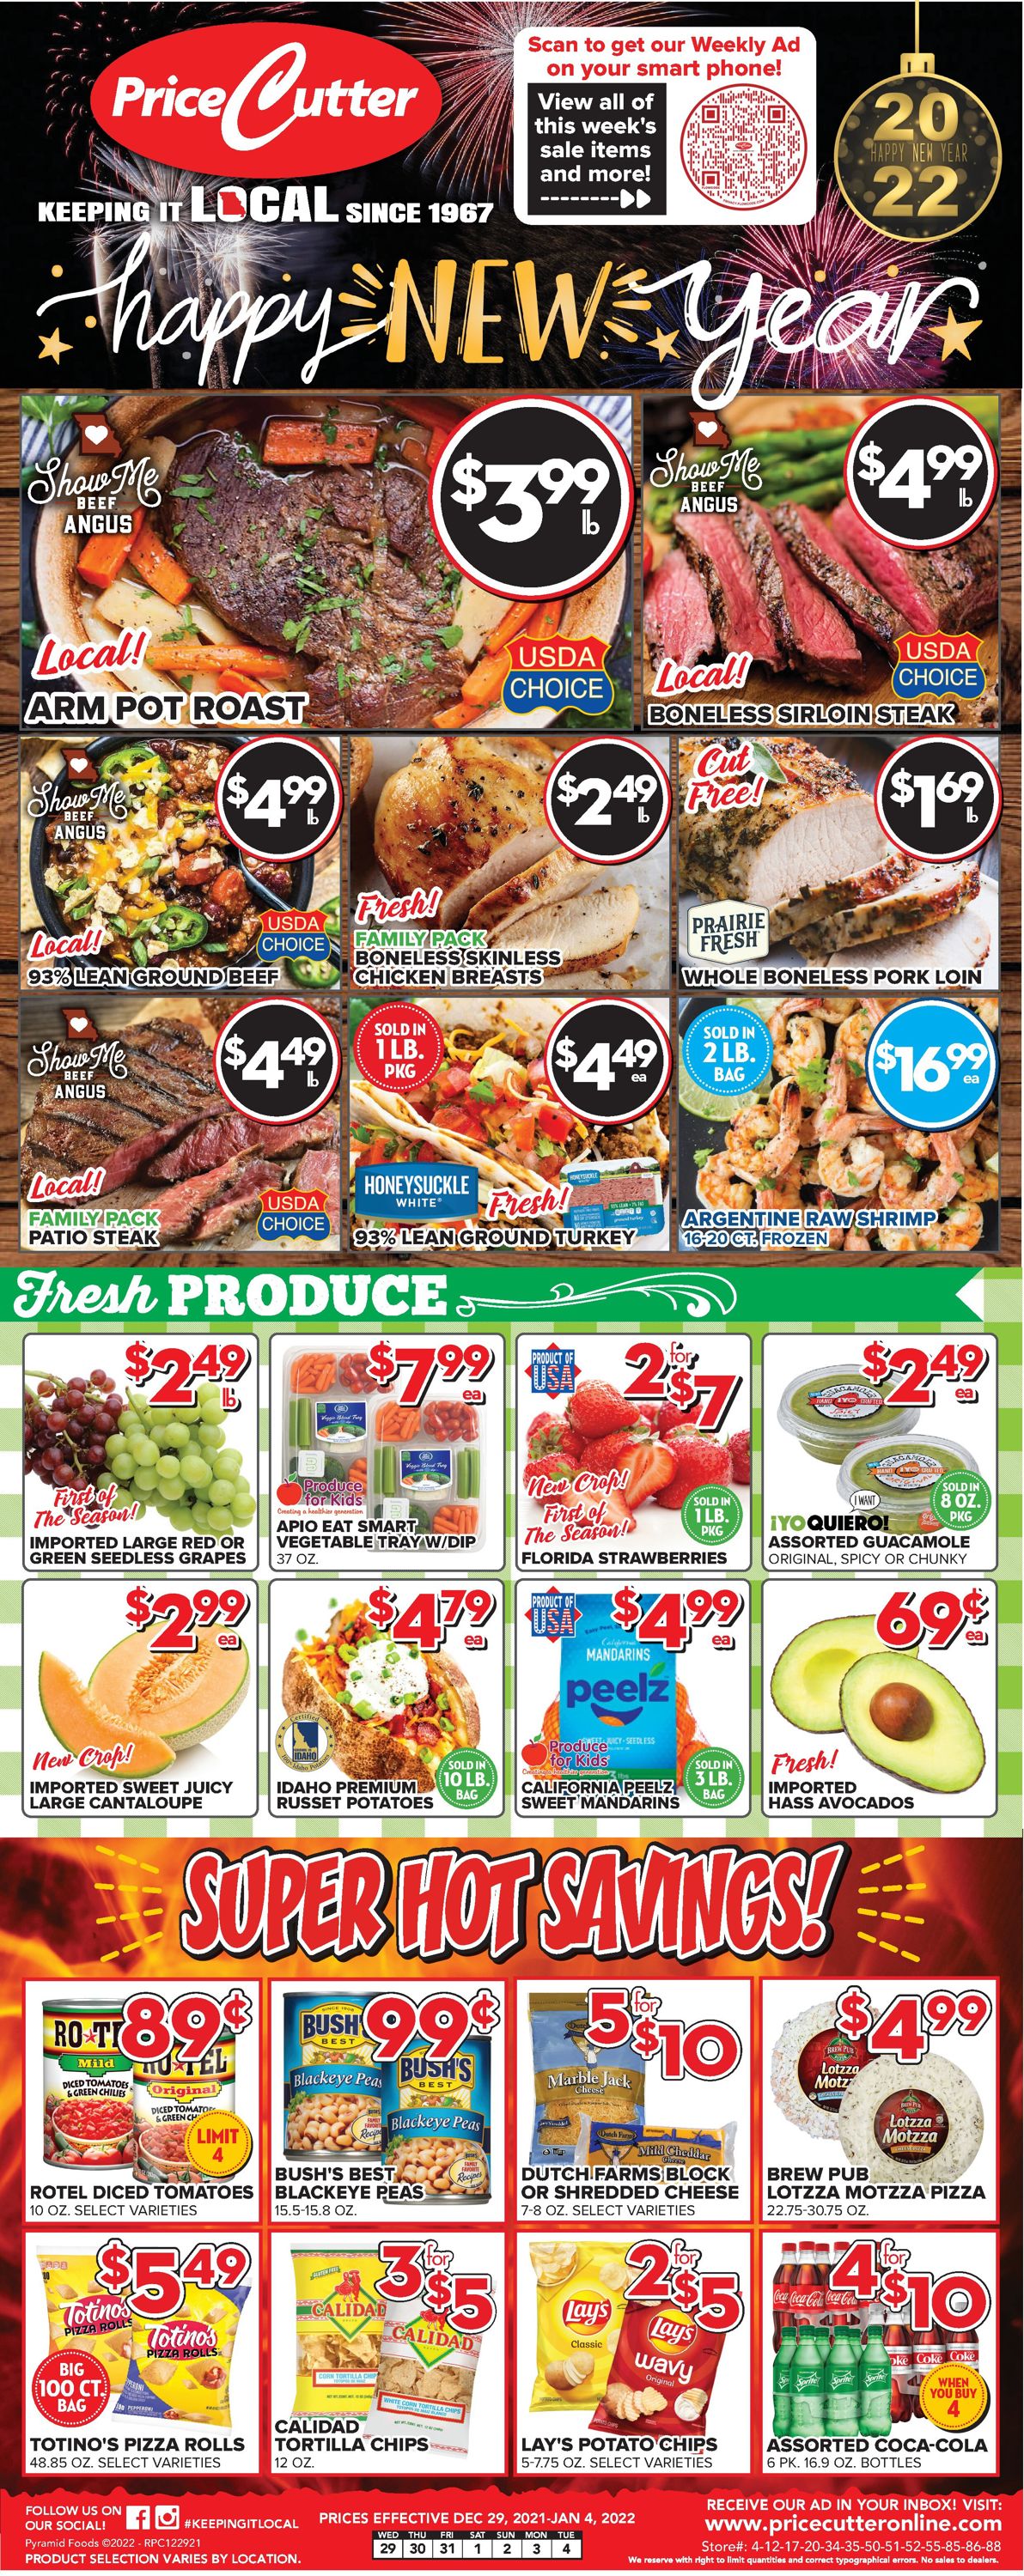 Price Cutter Weekly Ad Circular - valid 12/29-01/04/2022